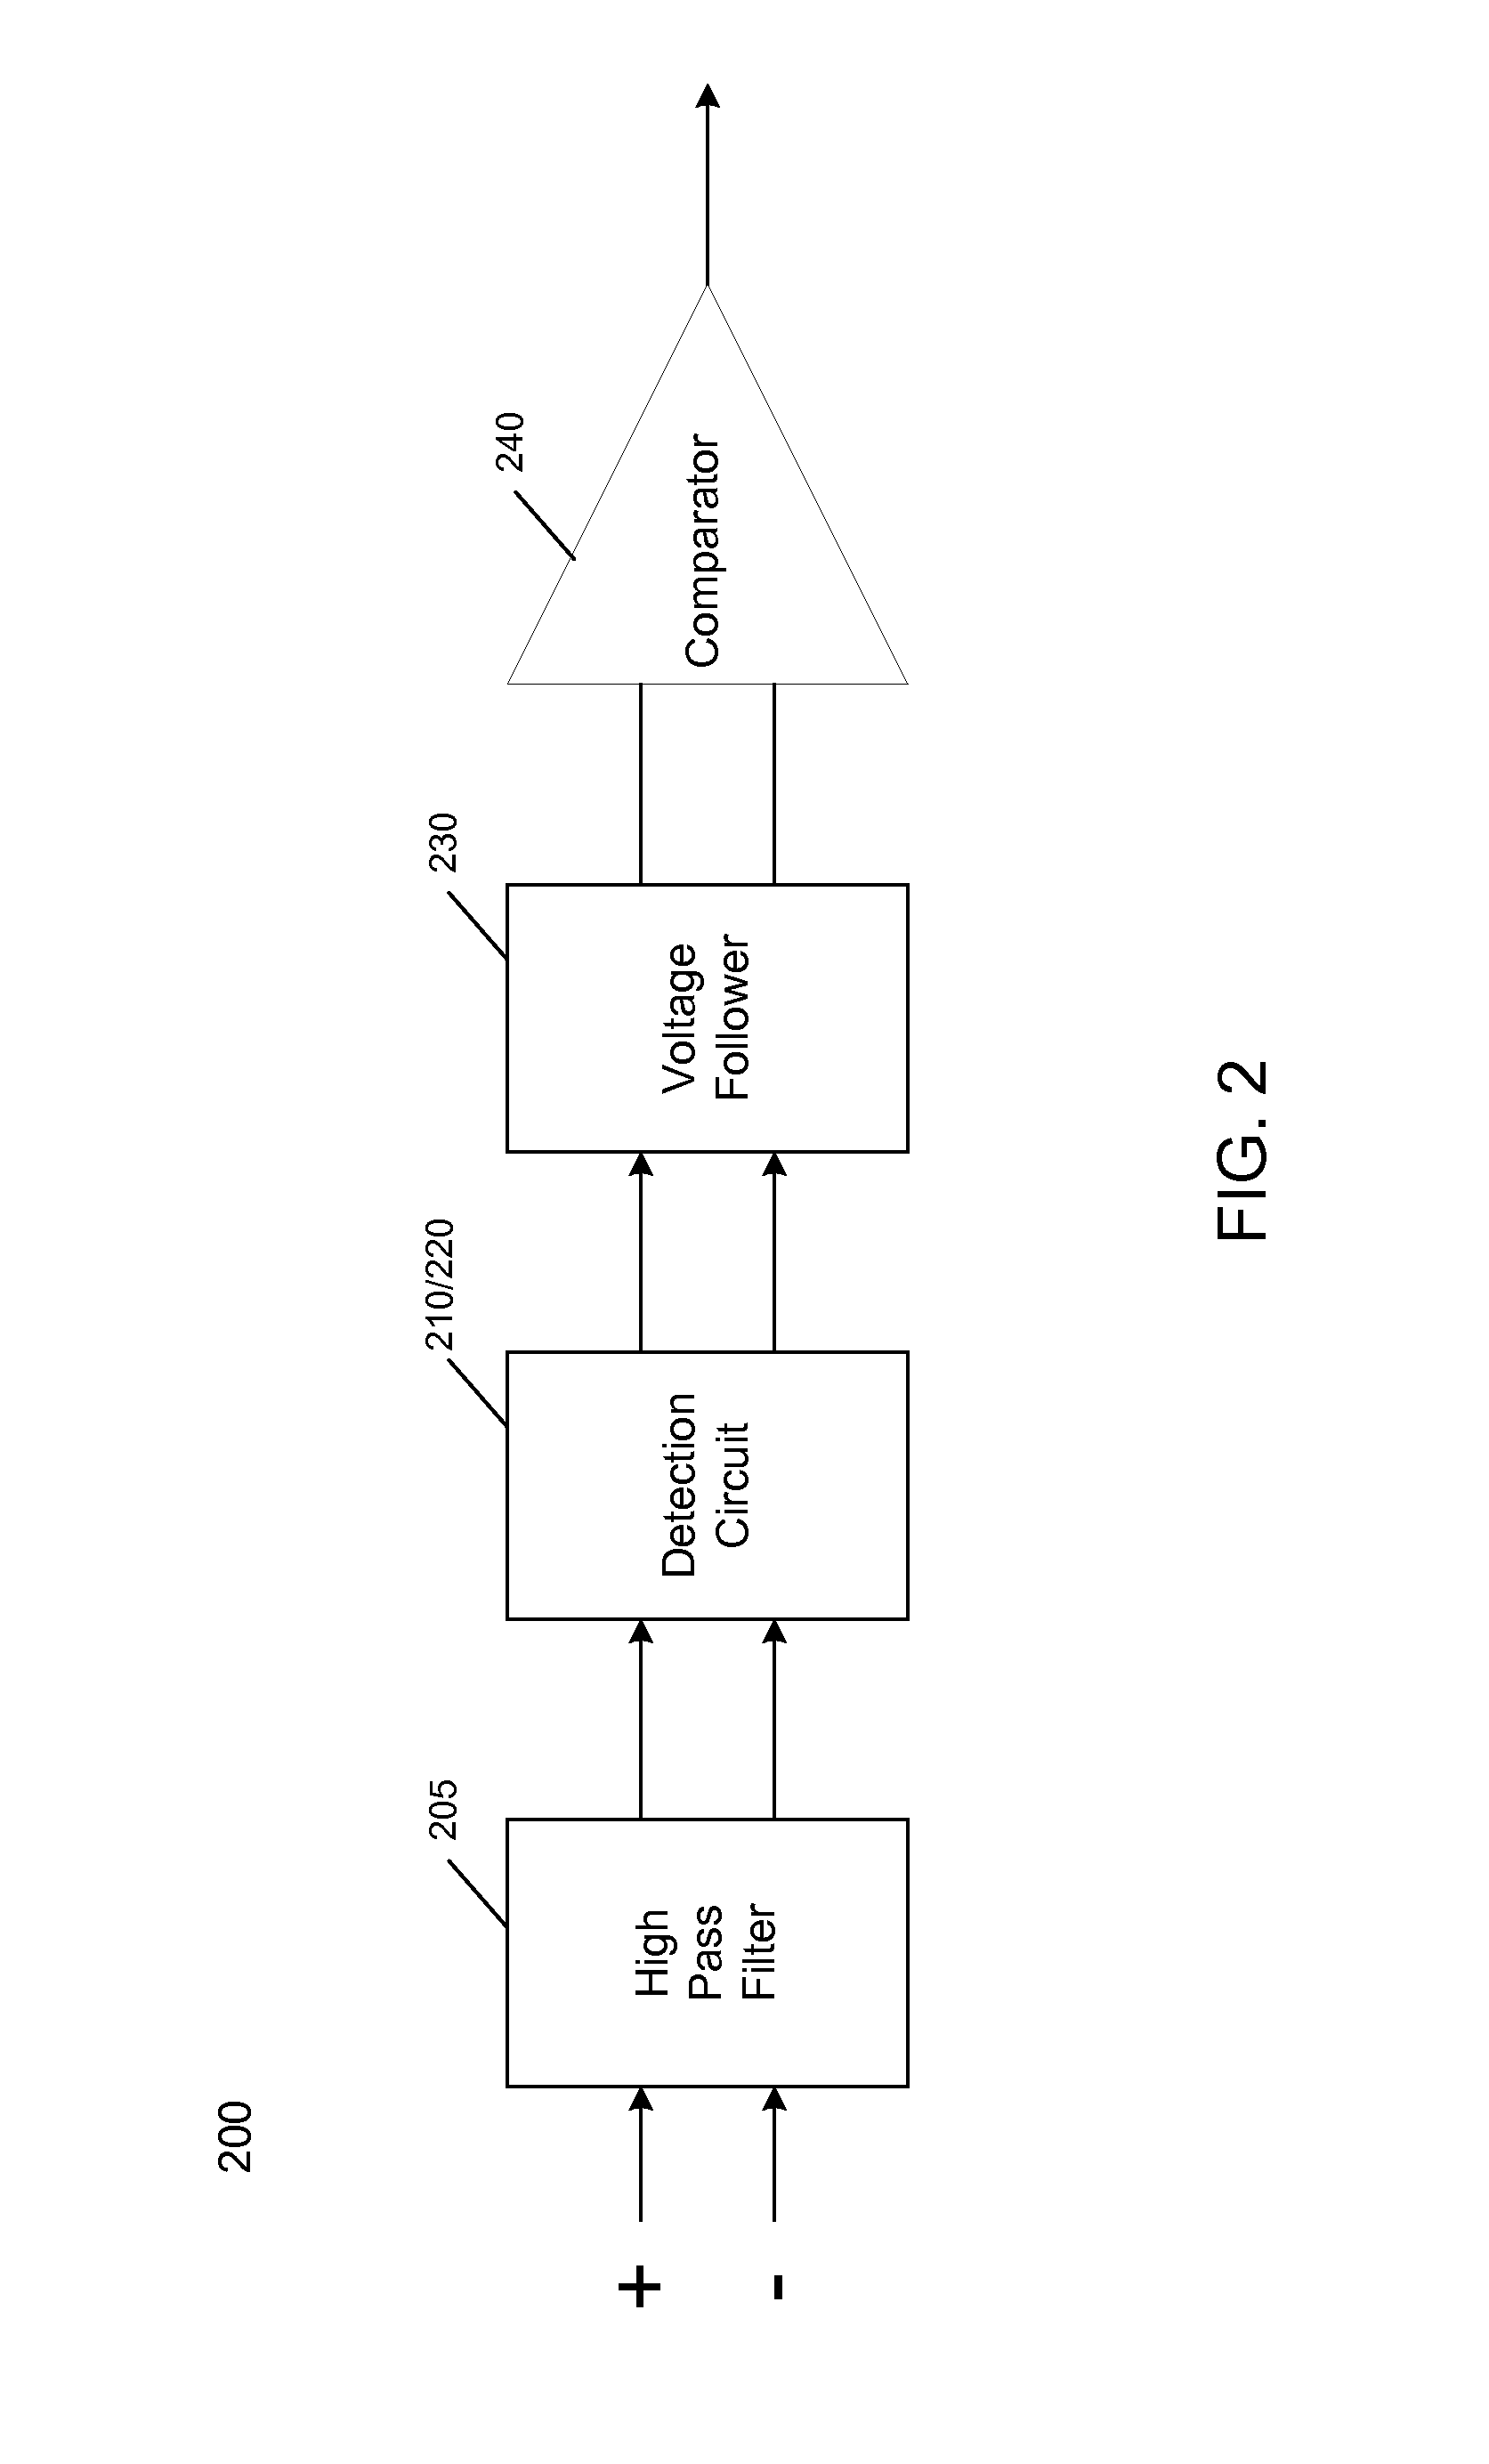 Capacitive isolation receiver circuitry